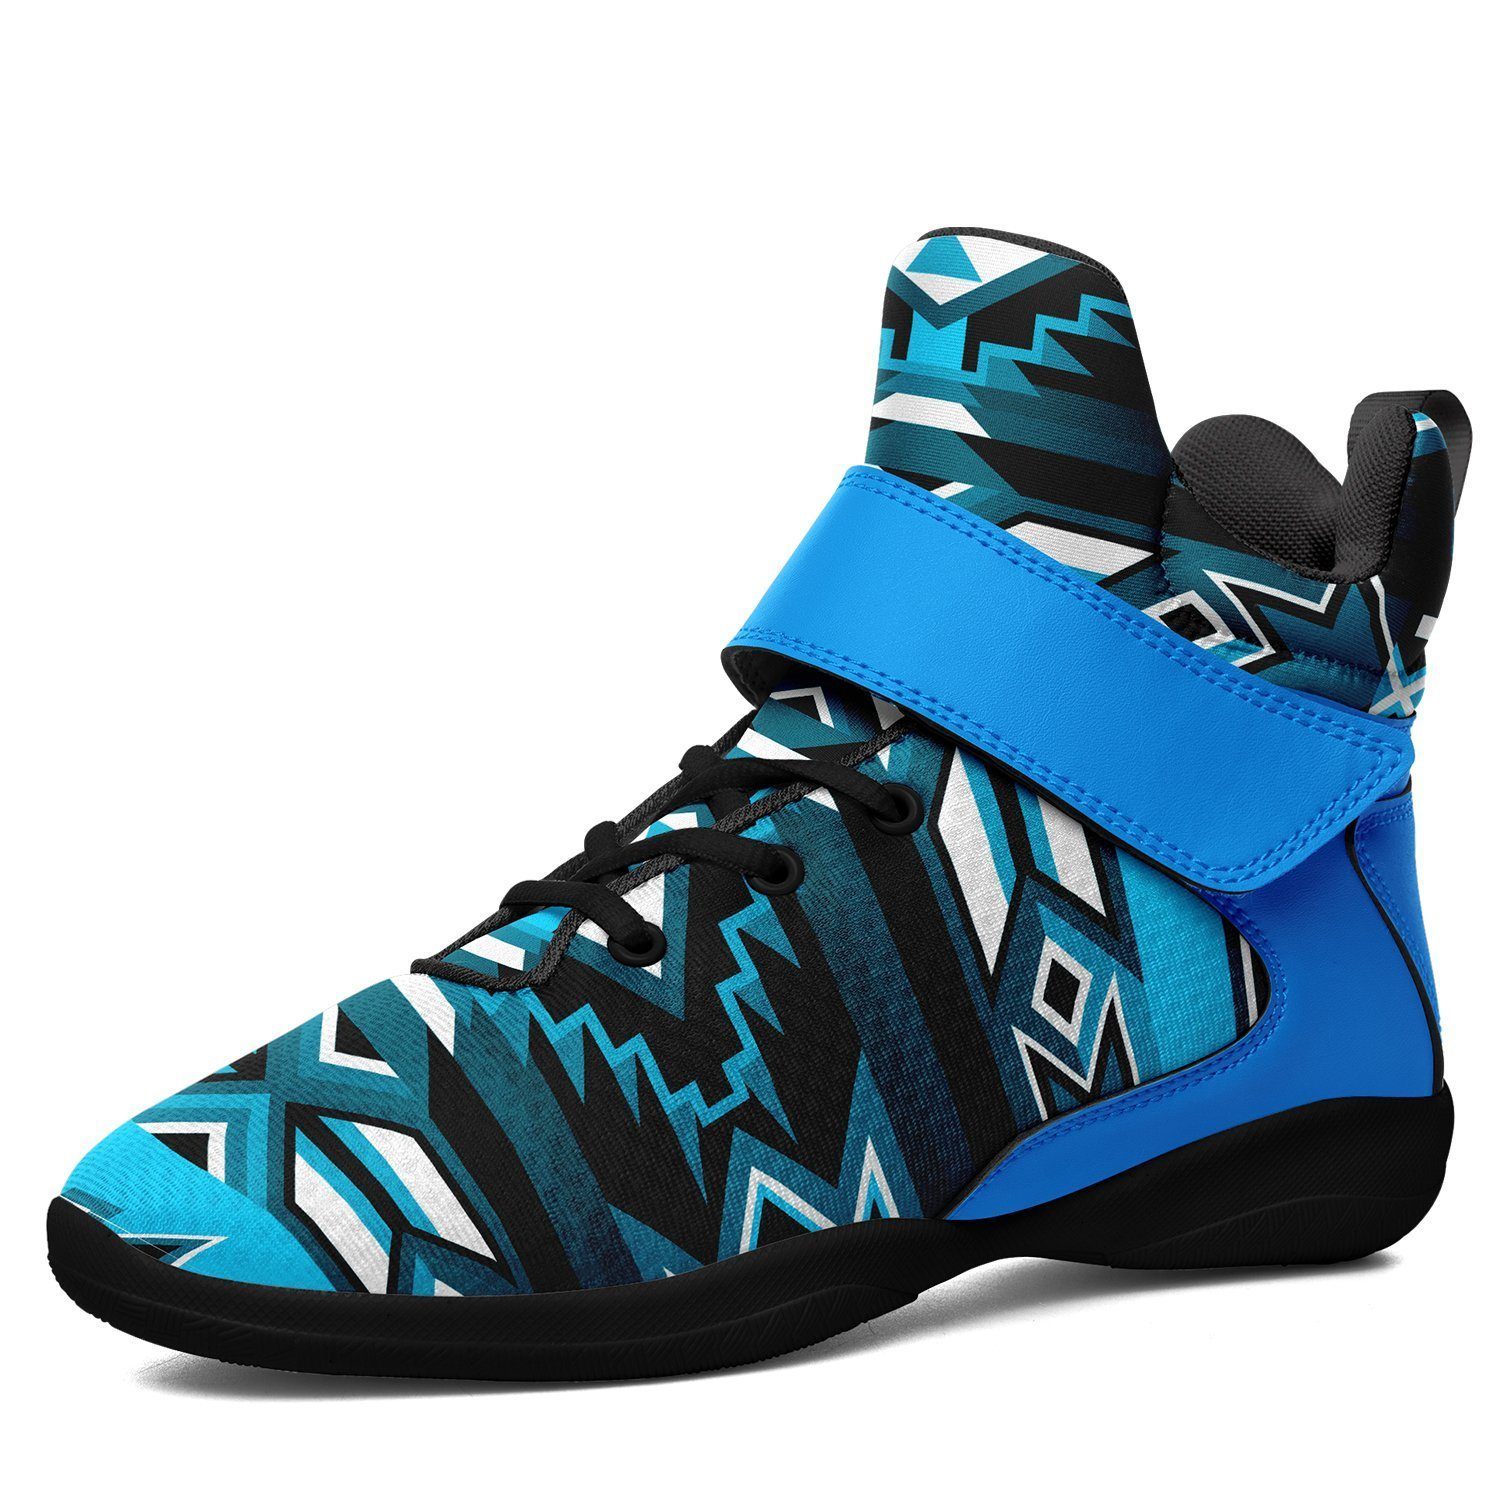 Northern Journey Ipottaa Basketball / Sport High Top Shoes - Black Sole 49 Dzine US Men 7 / EUR 40 Black Sole with Light Blue Strap 